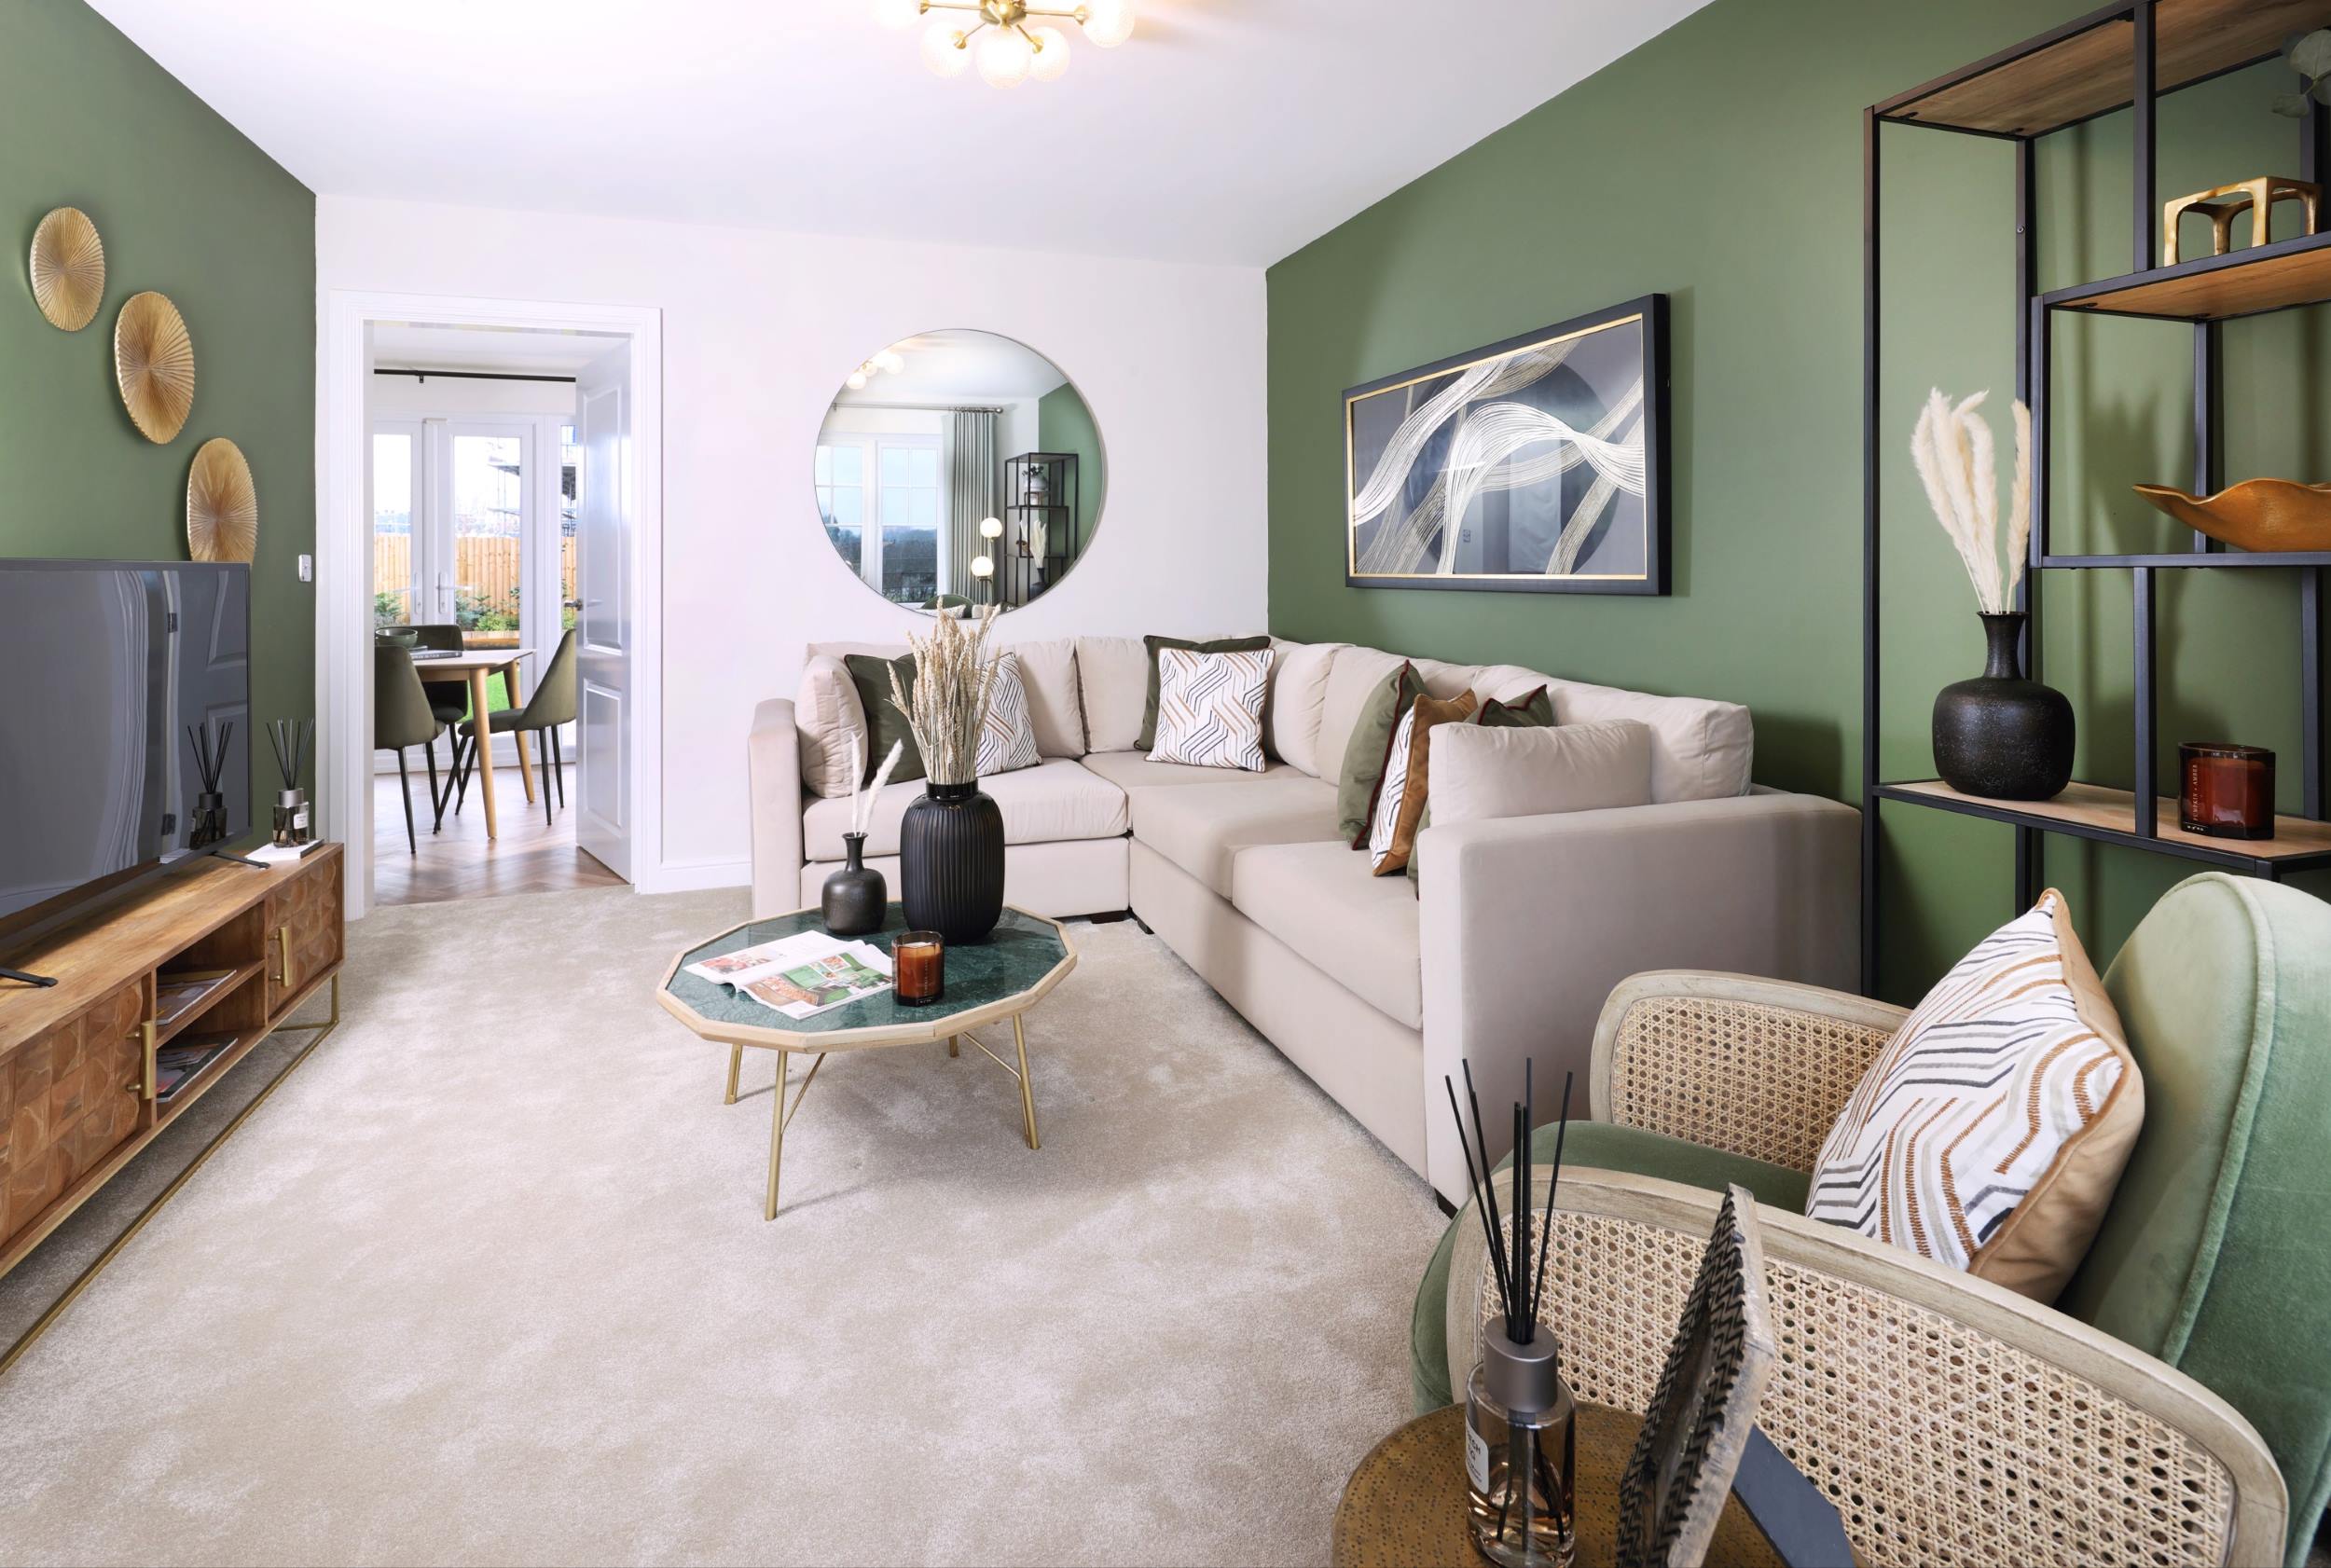 Show Homes In Catterall Offer Lifestyle And interiors Inspiration | The ...